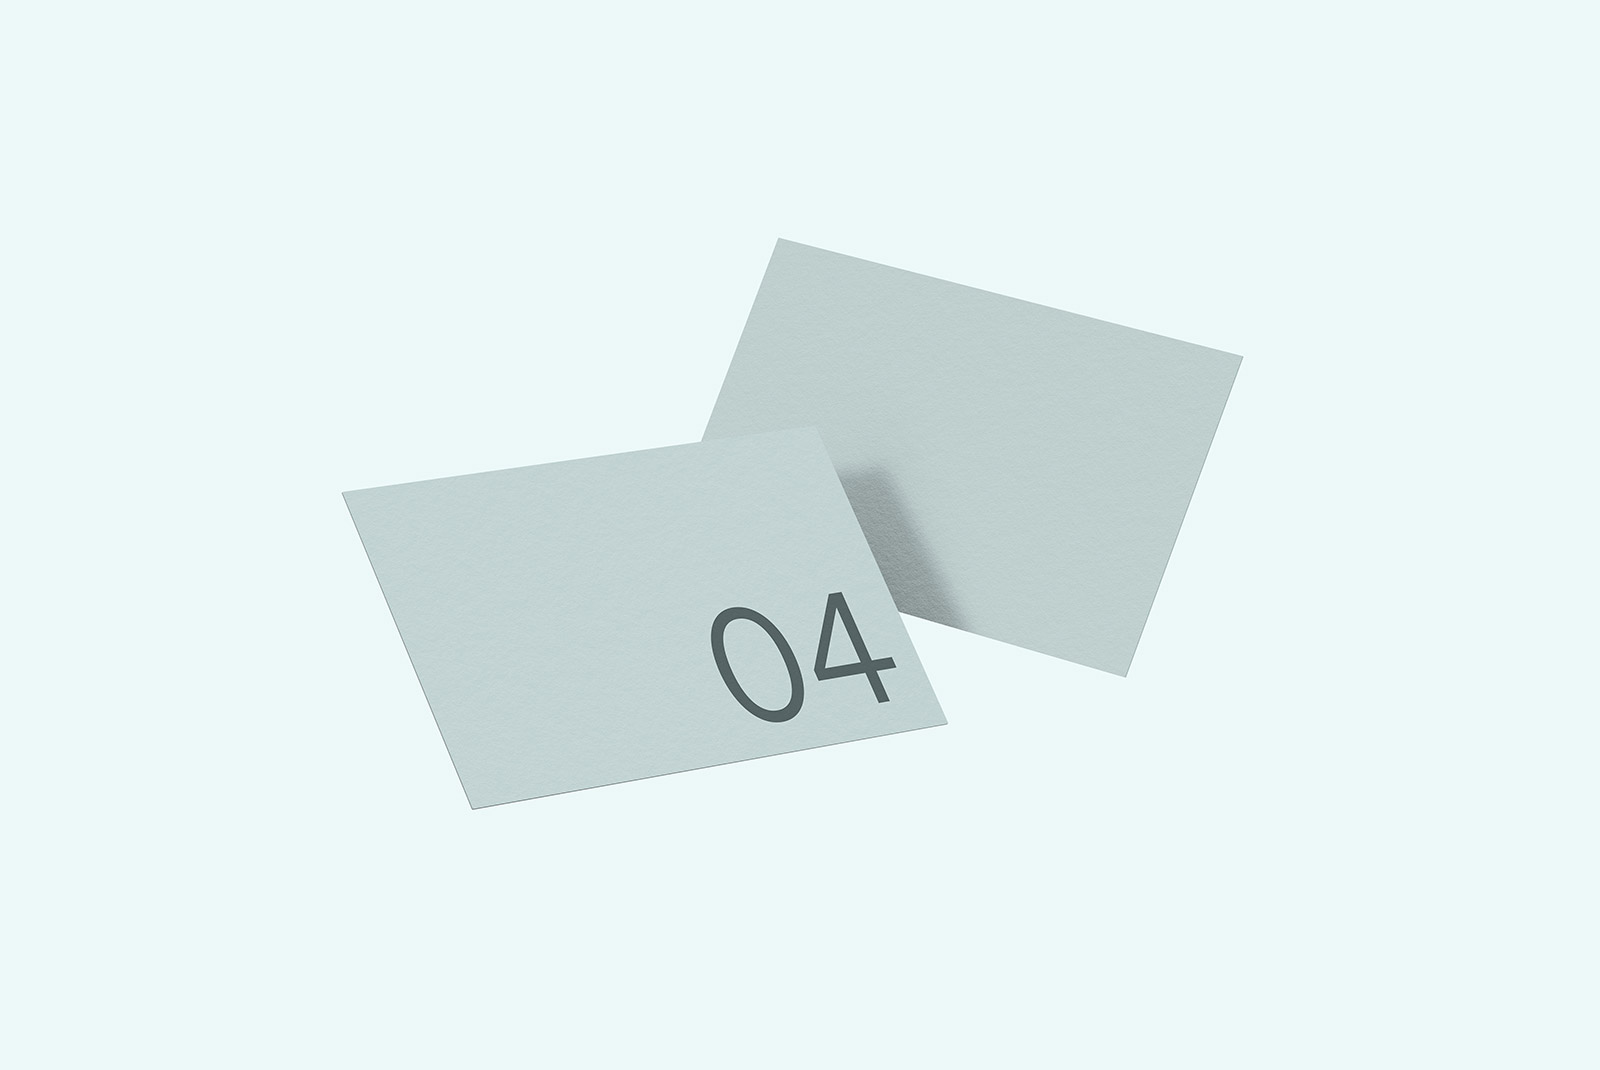 Two minimalist paper cards mockup on a light background, ideal for clean and contemporary card design presentations for designers.